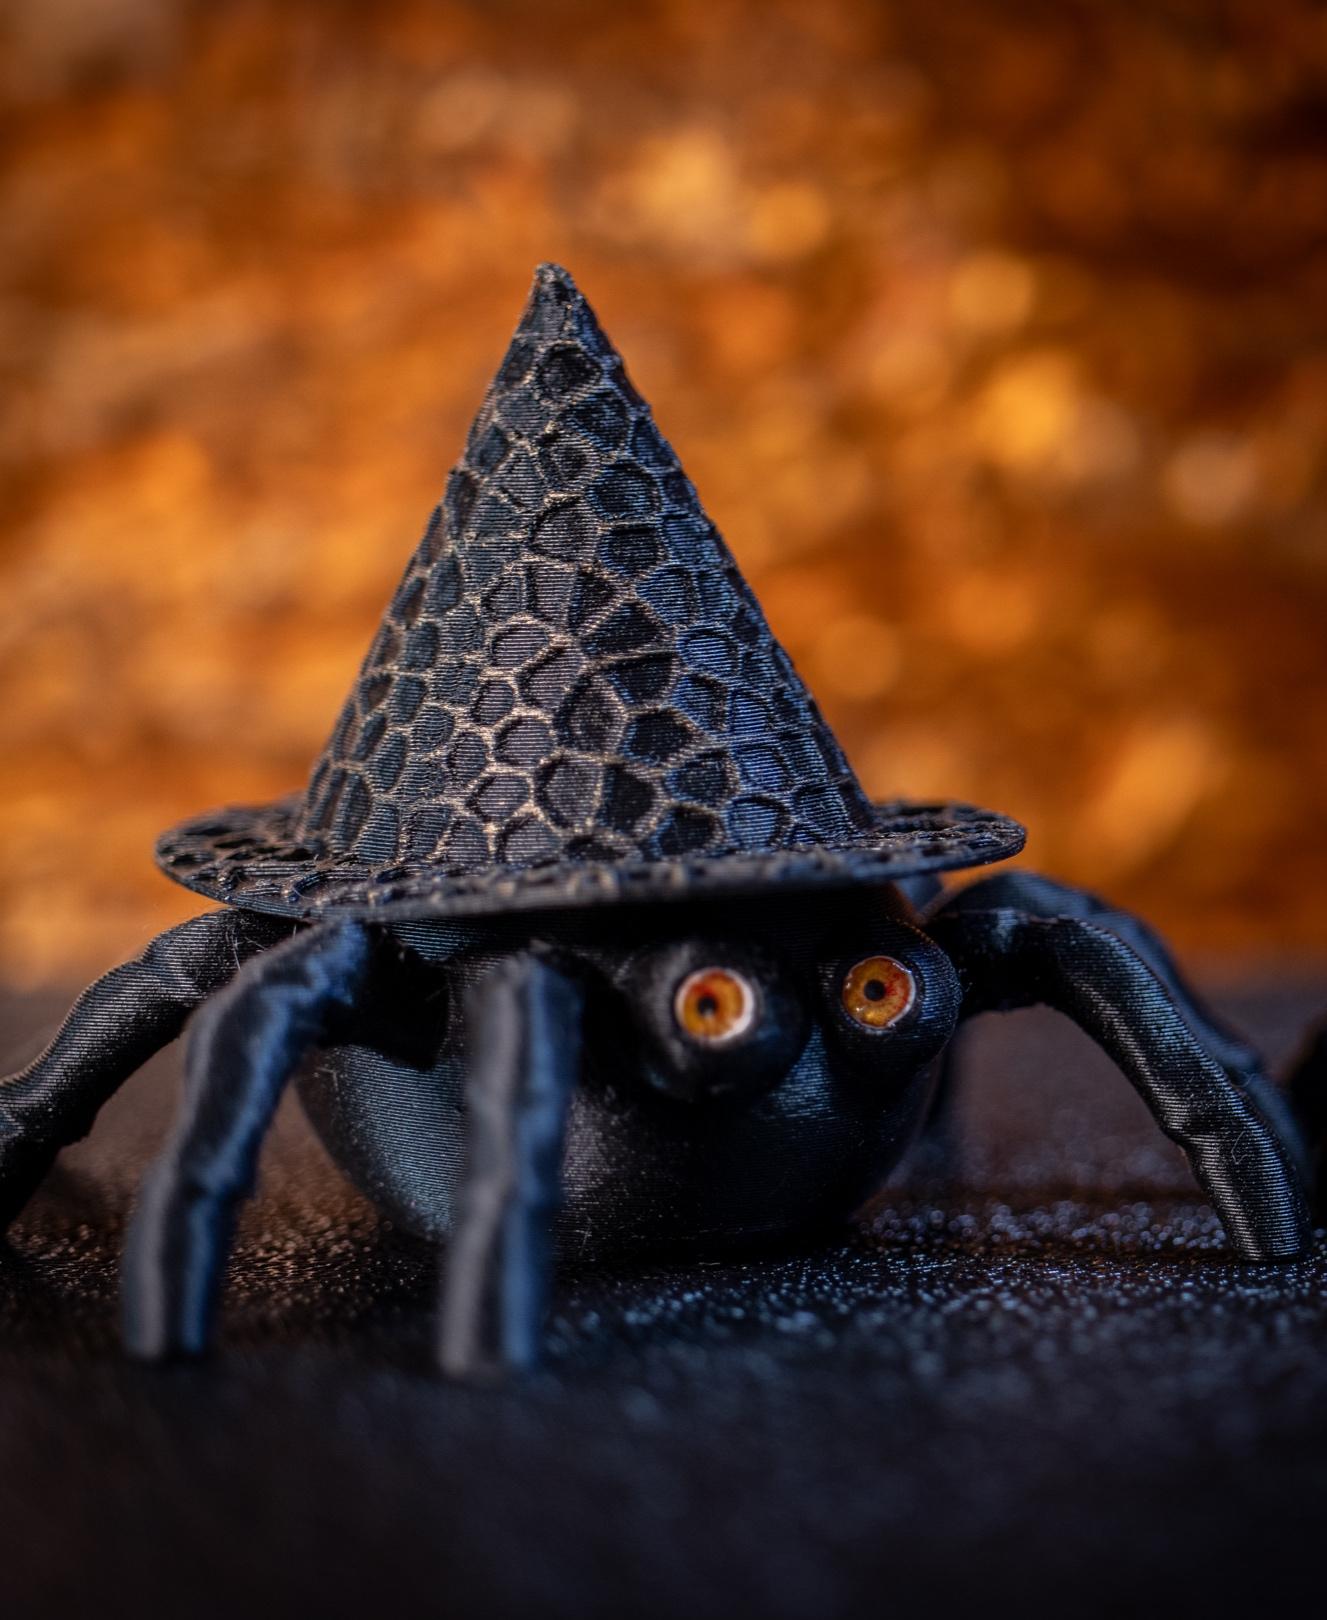 Spider Pot Witch's Hat - Thank you for such a fun design! I resized them to 3 inches, then printed the Spider Pot & Hat using Duramic Matte Black PLA. Then used some gold colored wax on my finger to rub on the high parts of his hat. Printed teeny eyes w/laser printer, then paper punched them out. Glued the eyes in w/3D clear craft glue. I made another one w/blue eyes. :-) Love them! Thanks so much. - 3d model